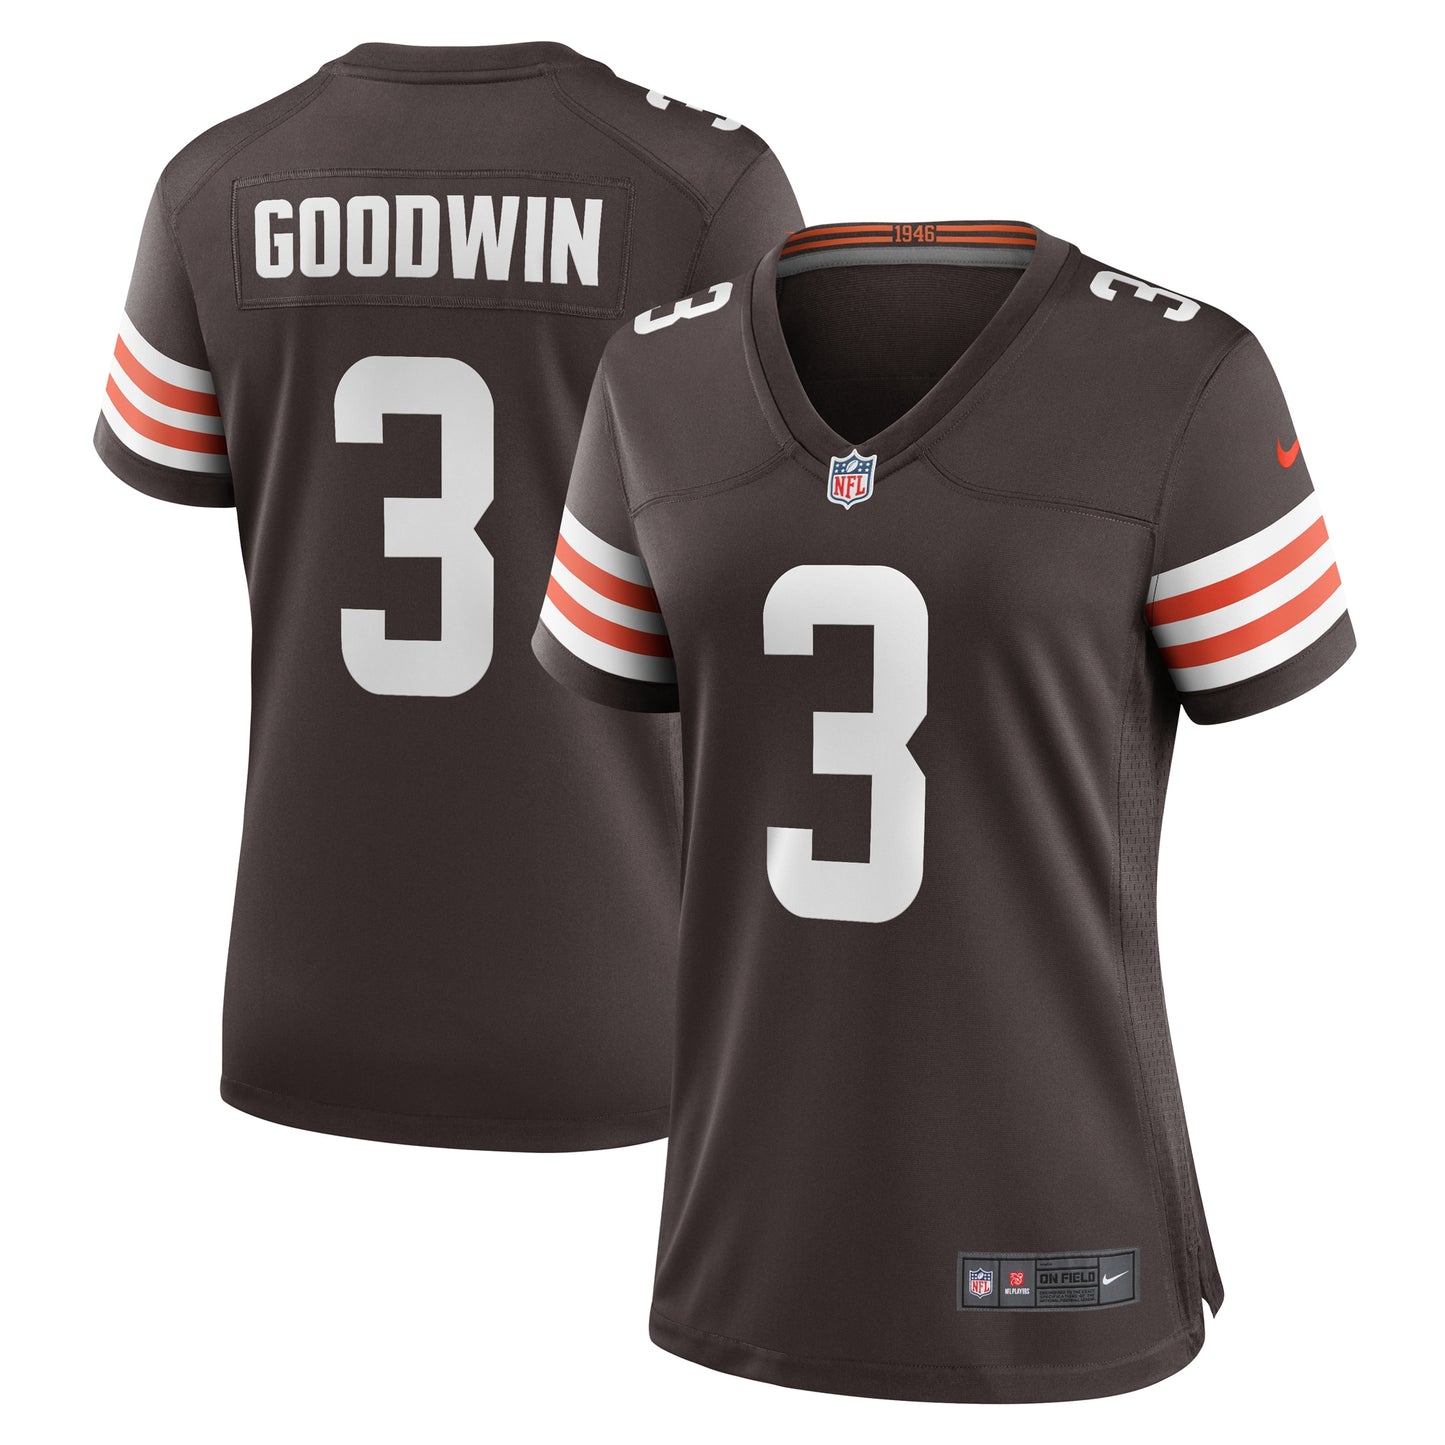 Marquise Goodwin Cleveland Browns Nike Women's Team Game Jersey - Brown